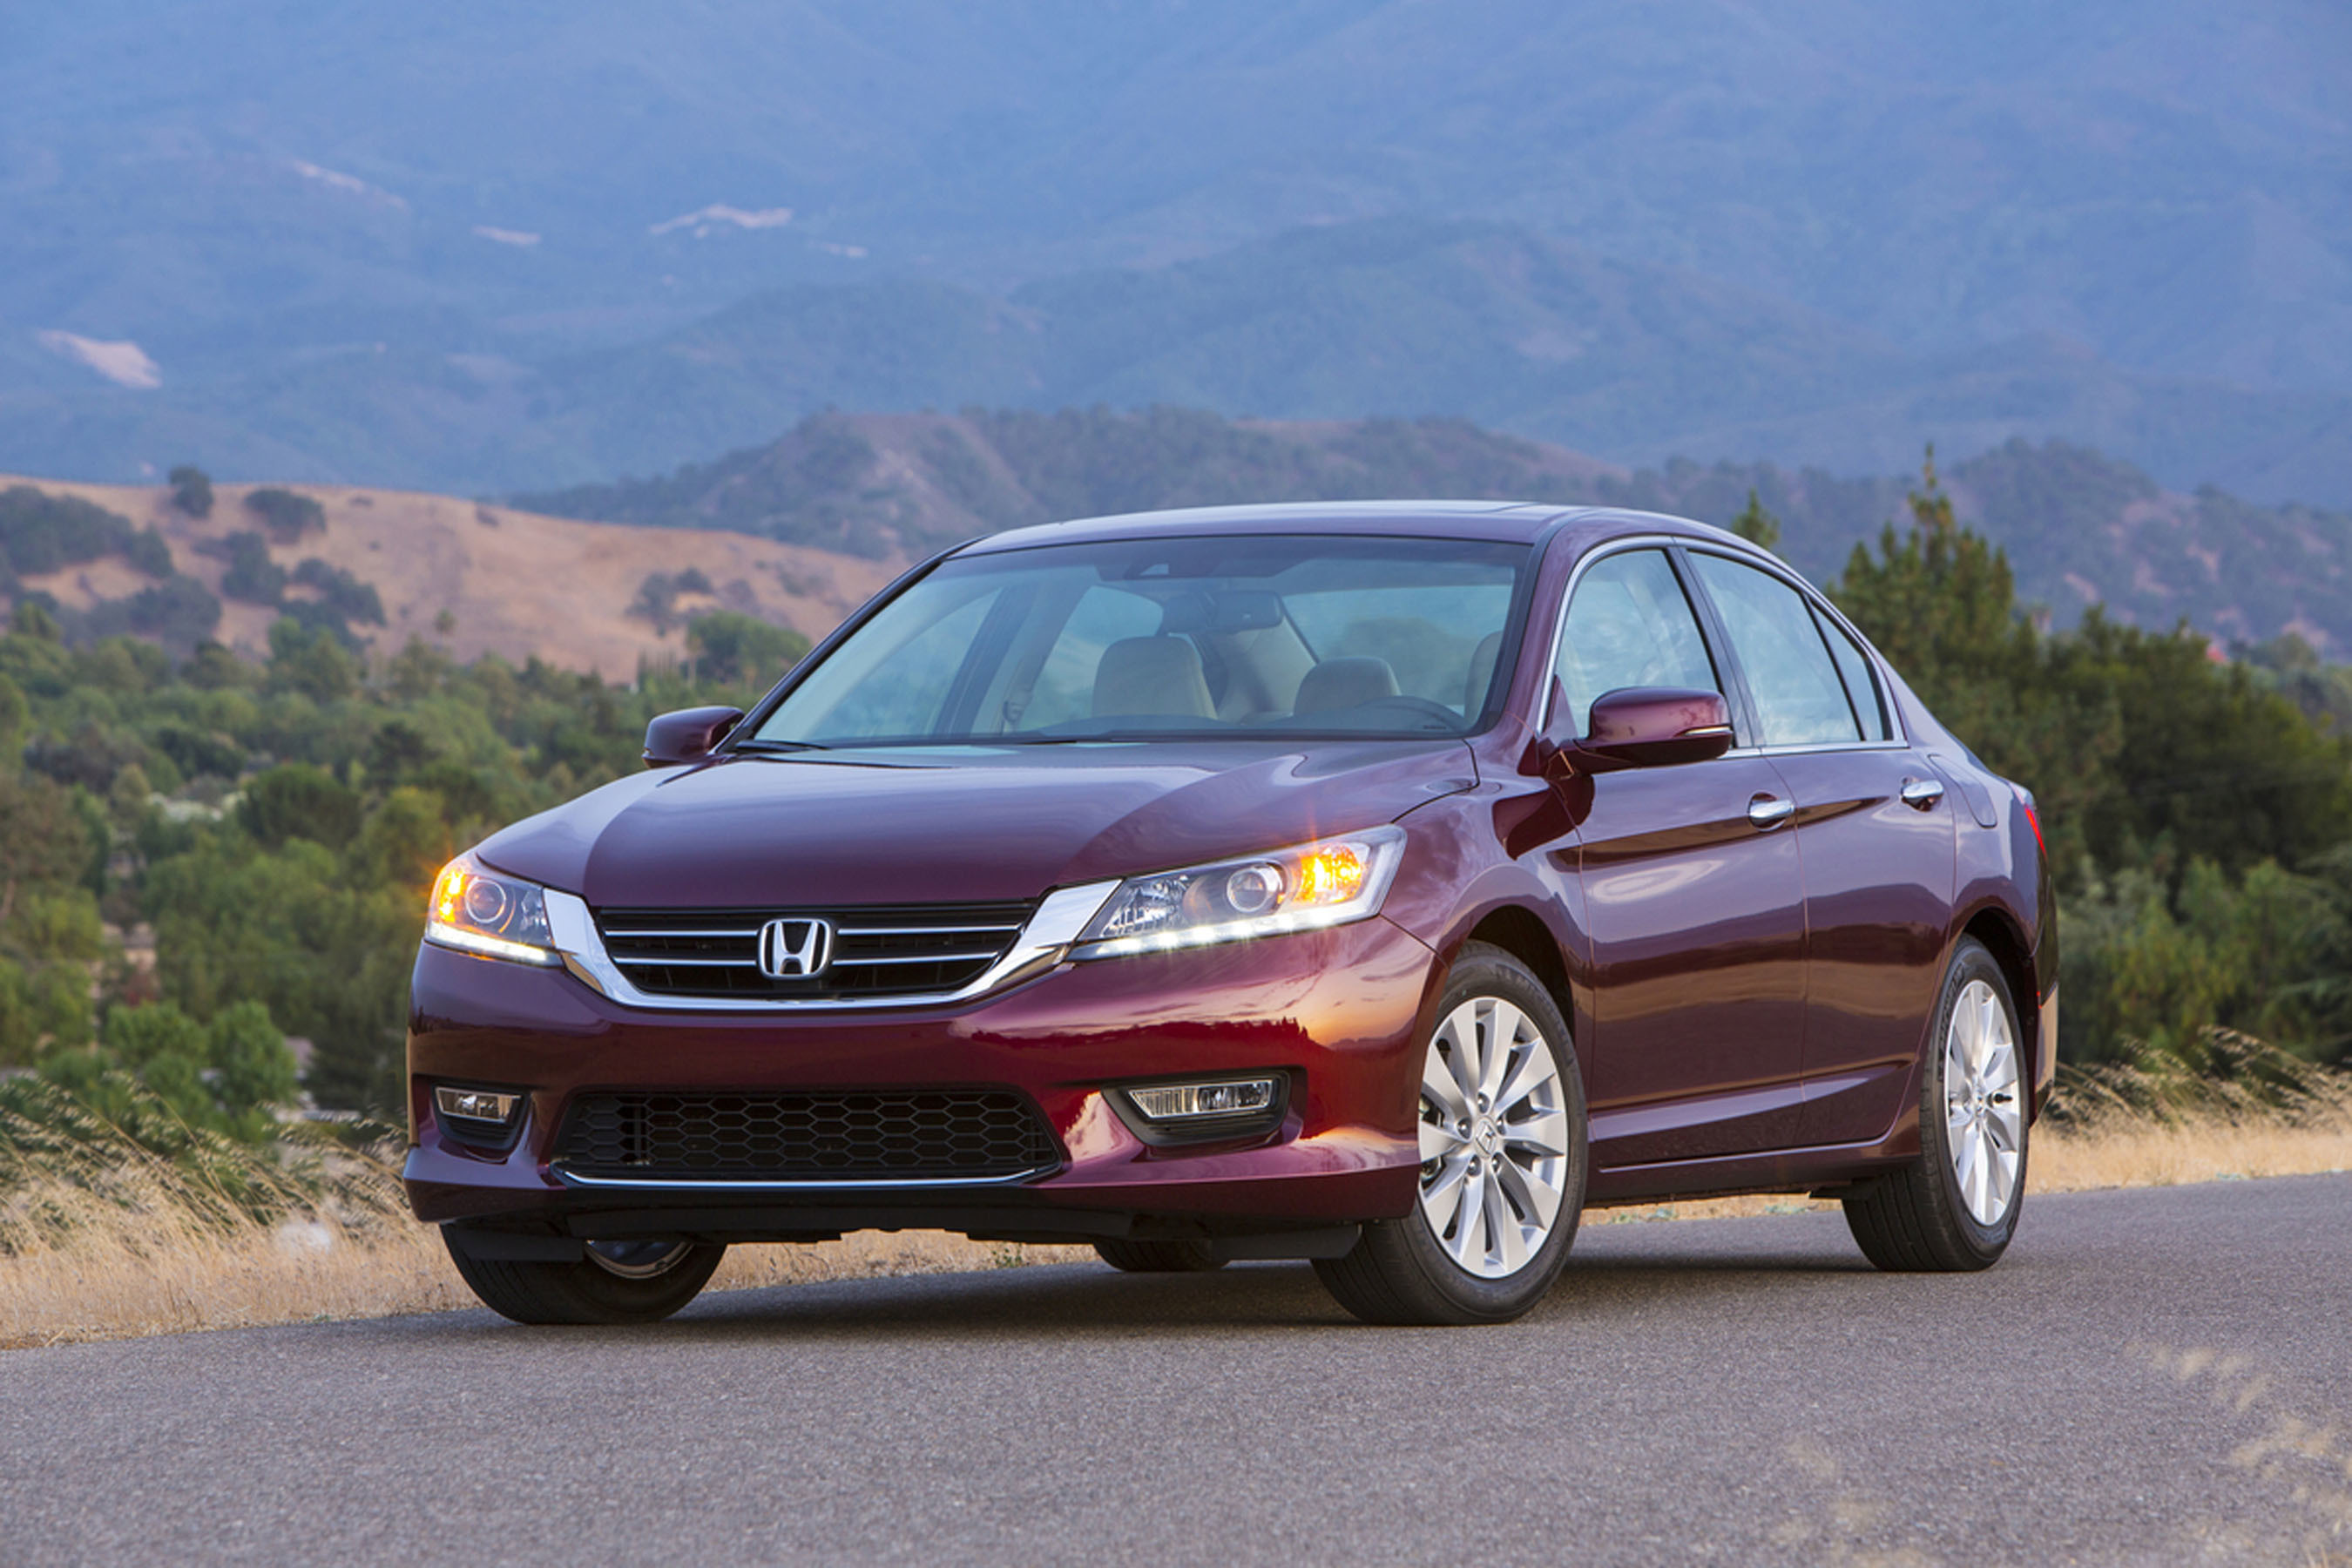 Honda Named Most Trusted Brand and Best Overall Brand by Thousands of New-Car Shoppers in KBB.com’s 2014 Brand Image Awards (PRNewsFoto/American Honda Motor Co., Inc. )